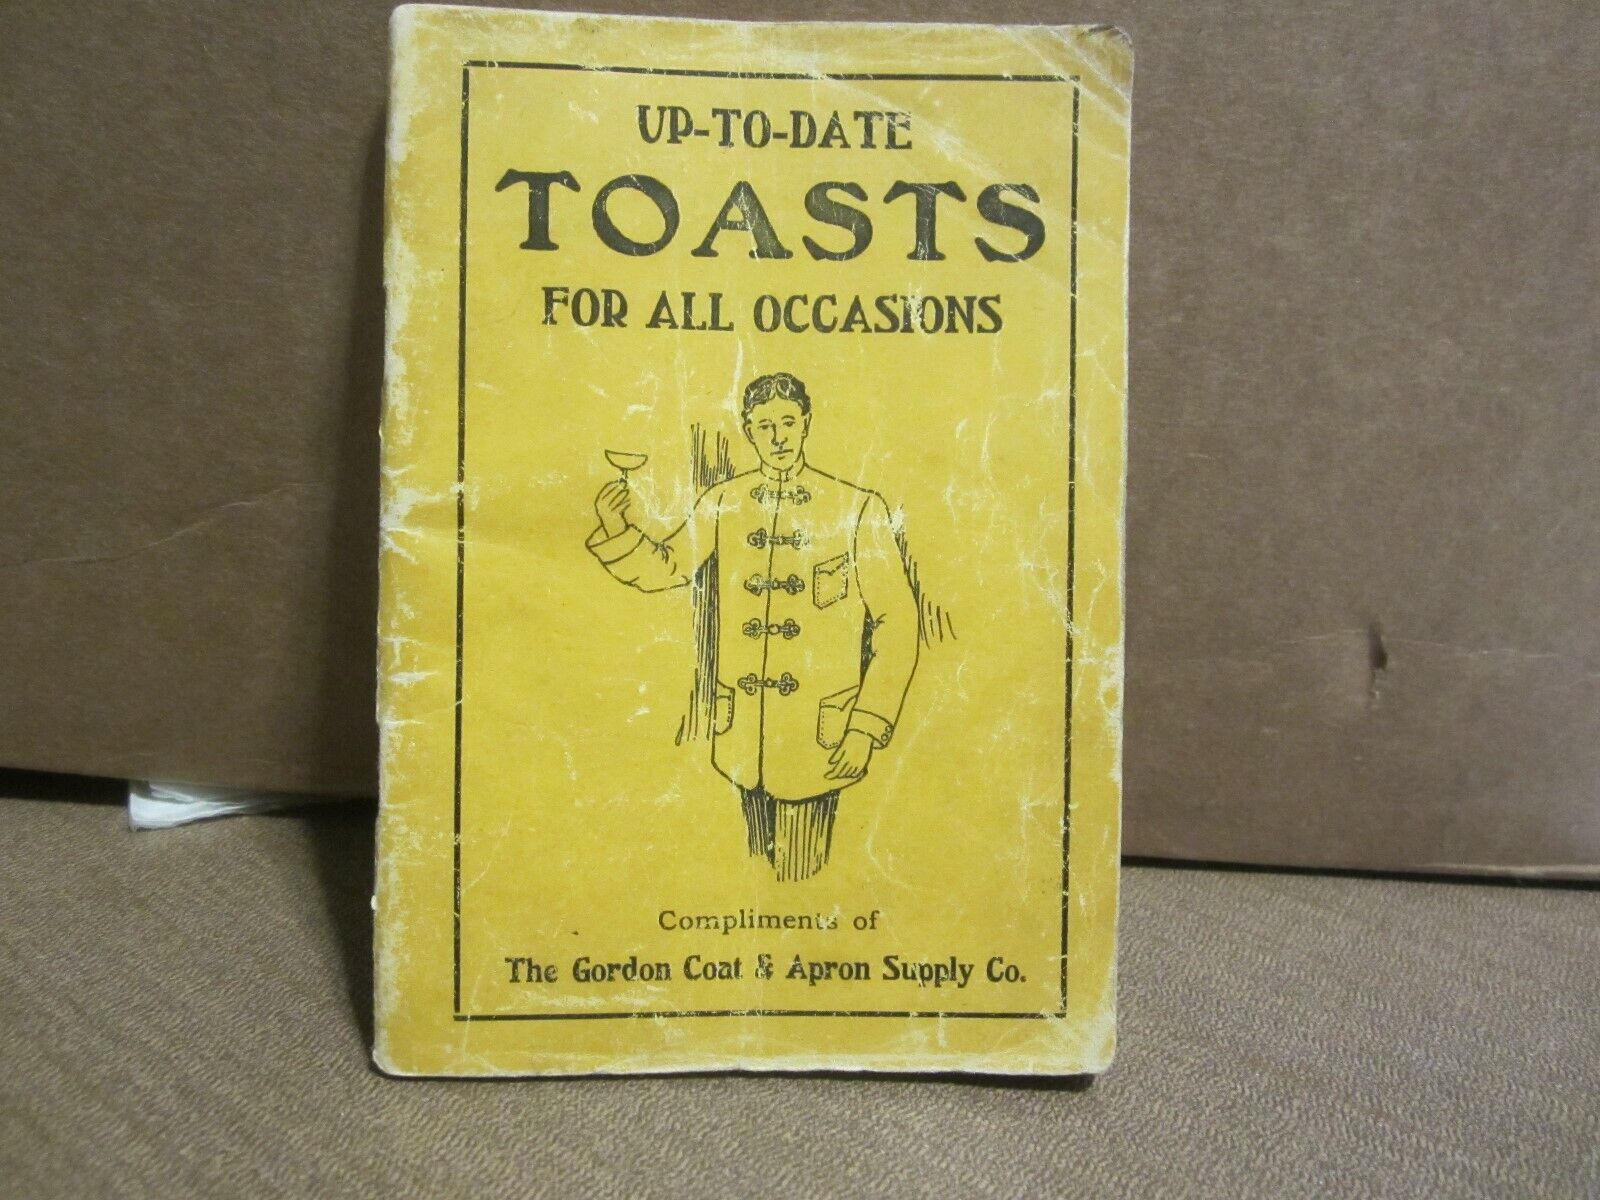 THE GORDON COAT & APRON SUPPLY CO. 1903 BOOK OF TOASTS